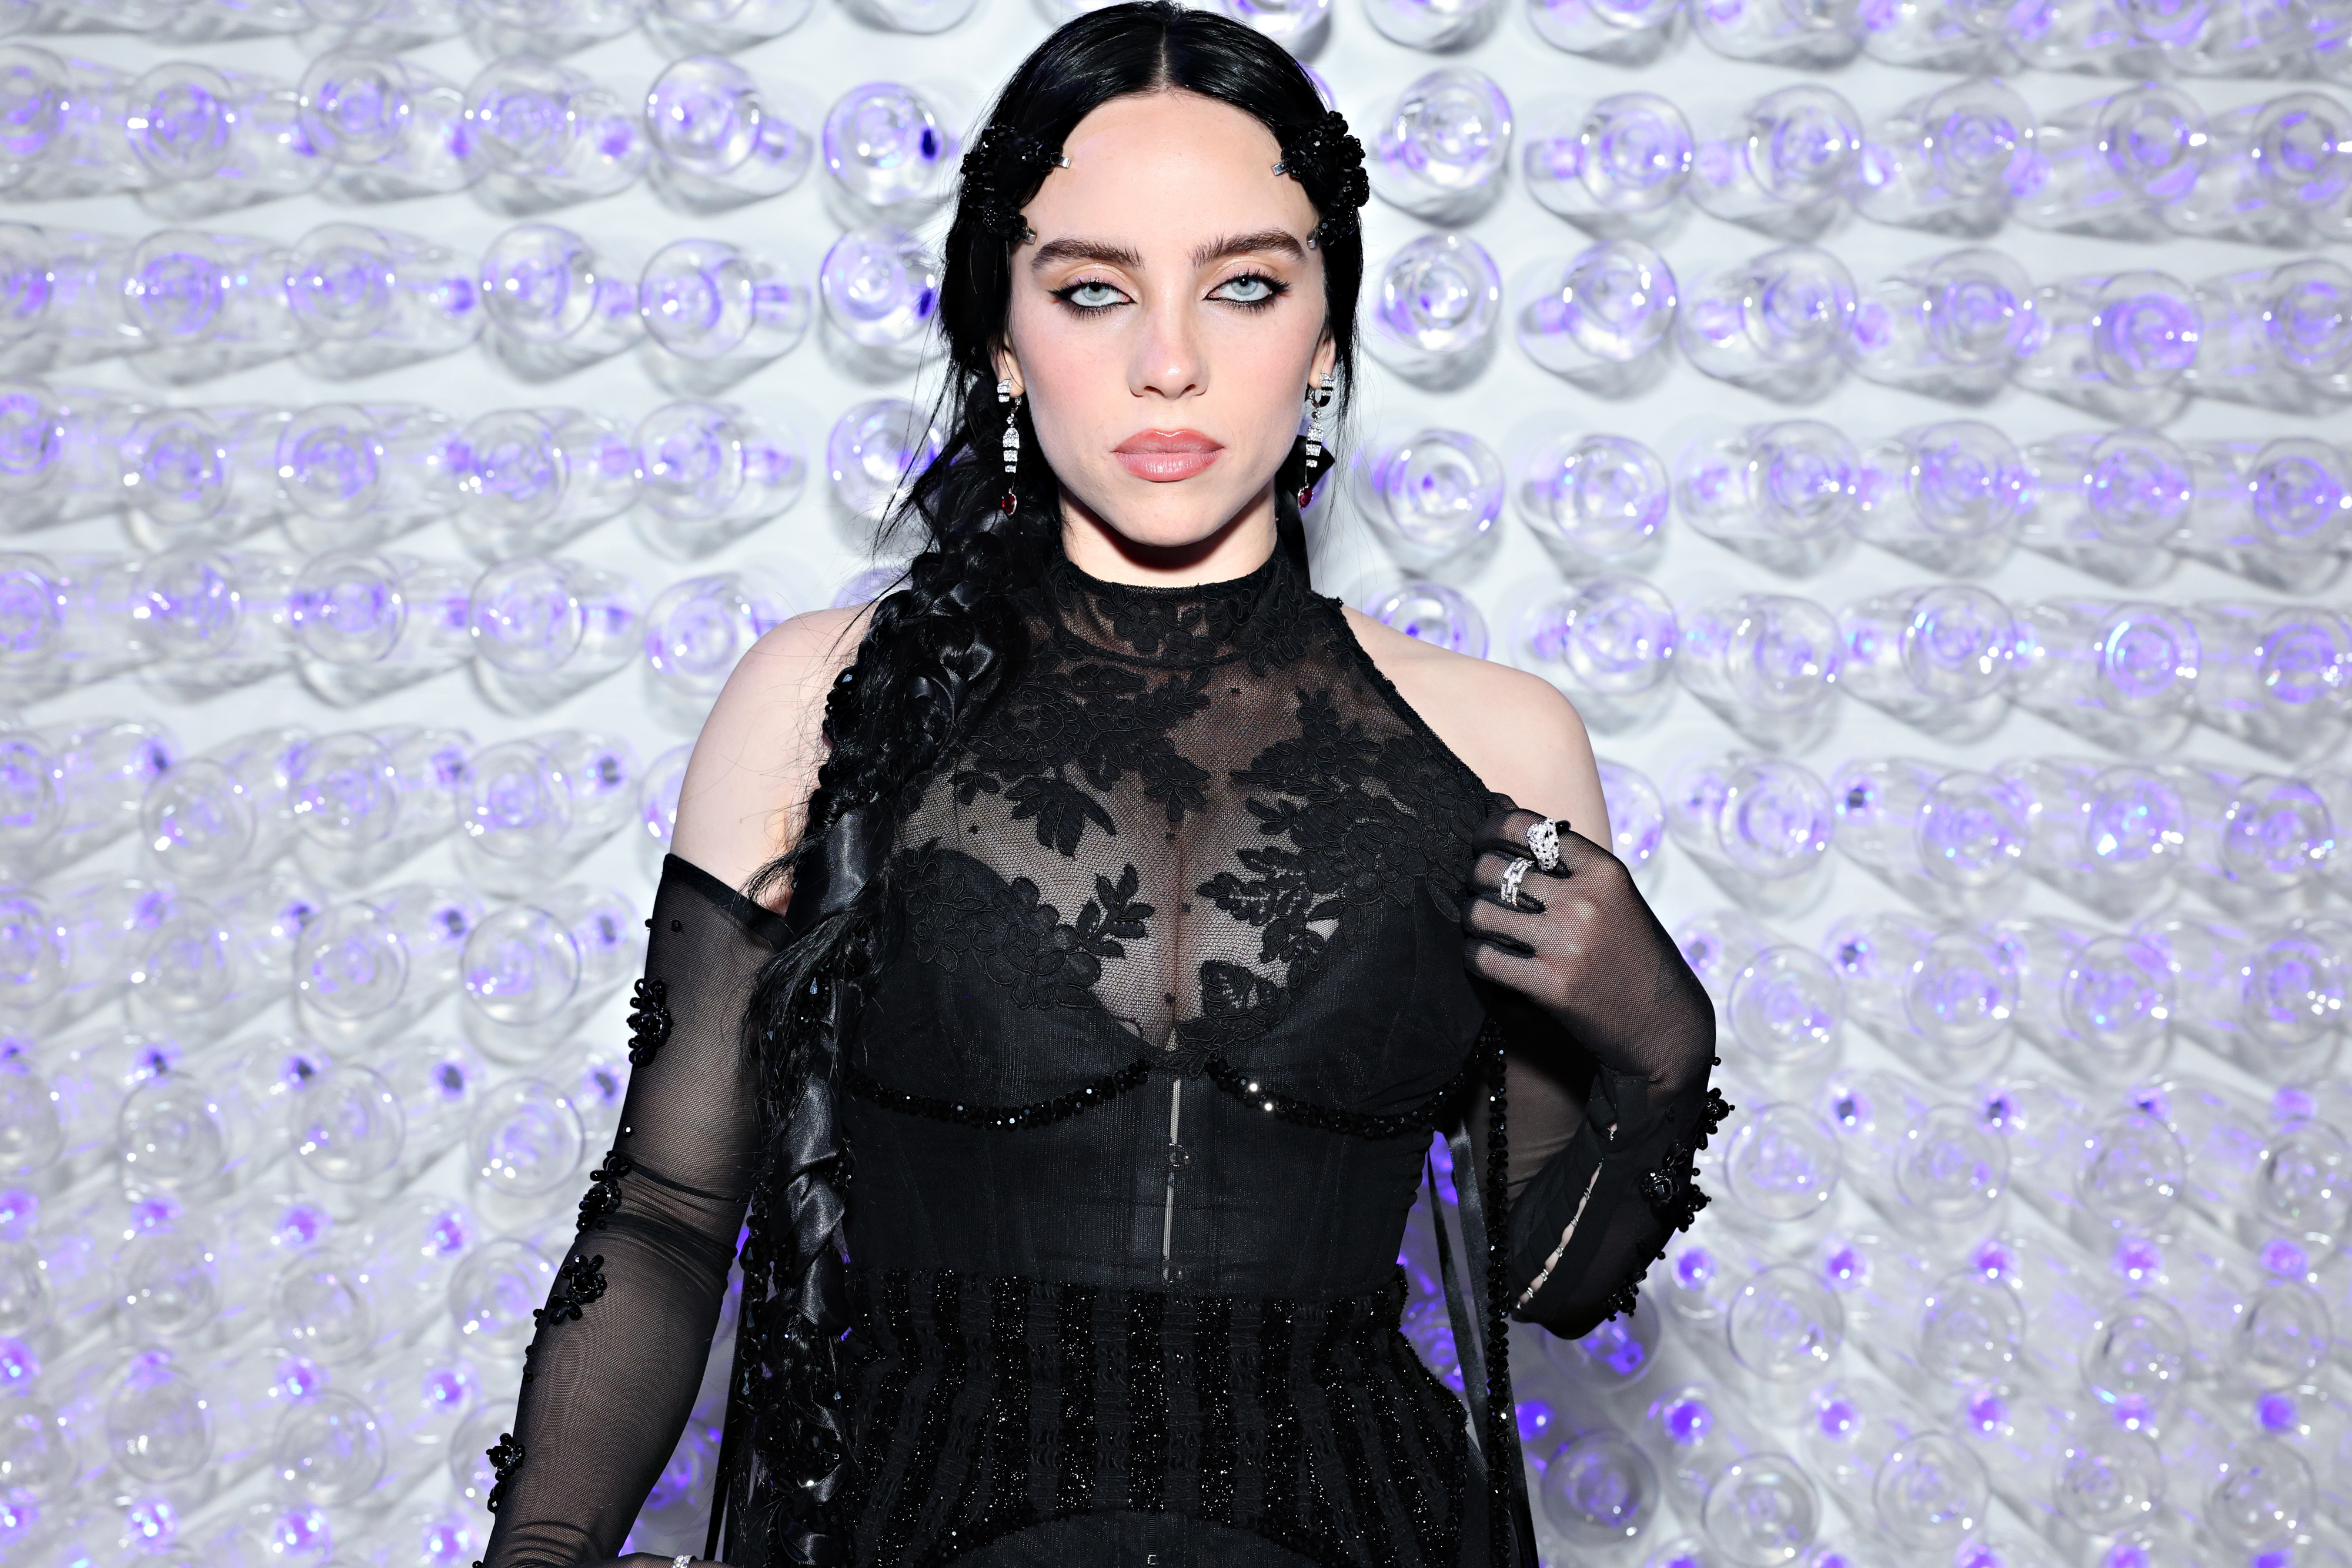 Close-up of Billie at a media event